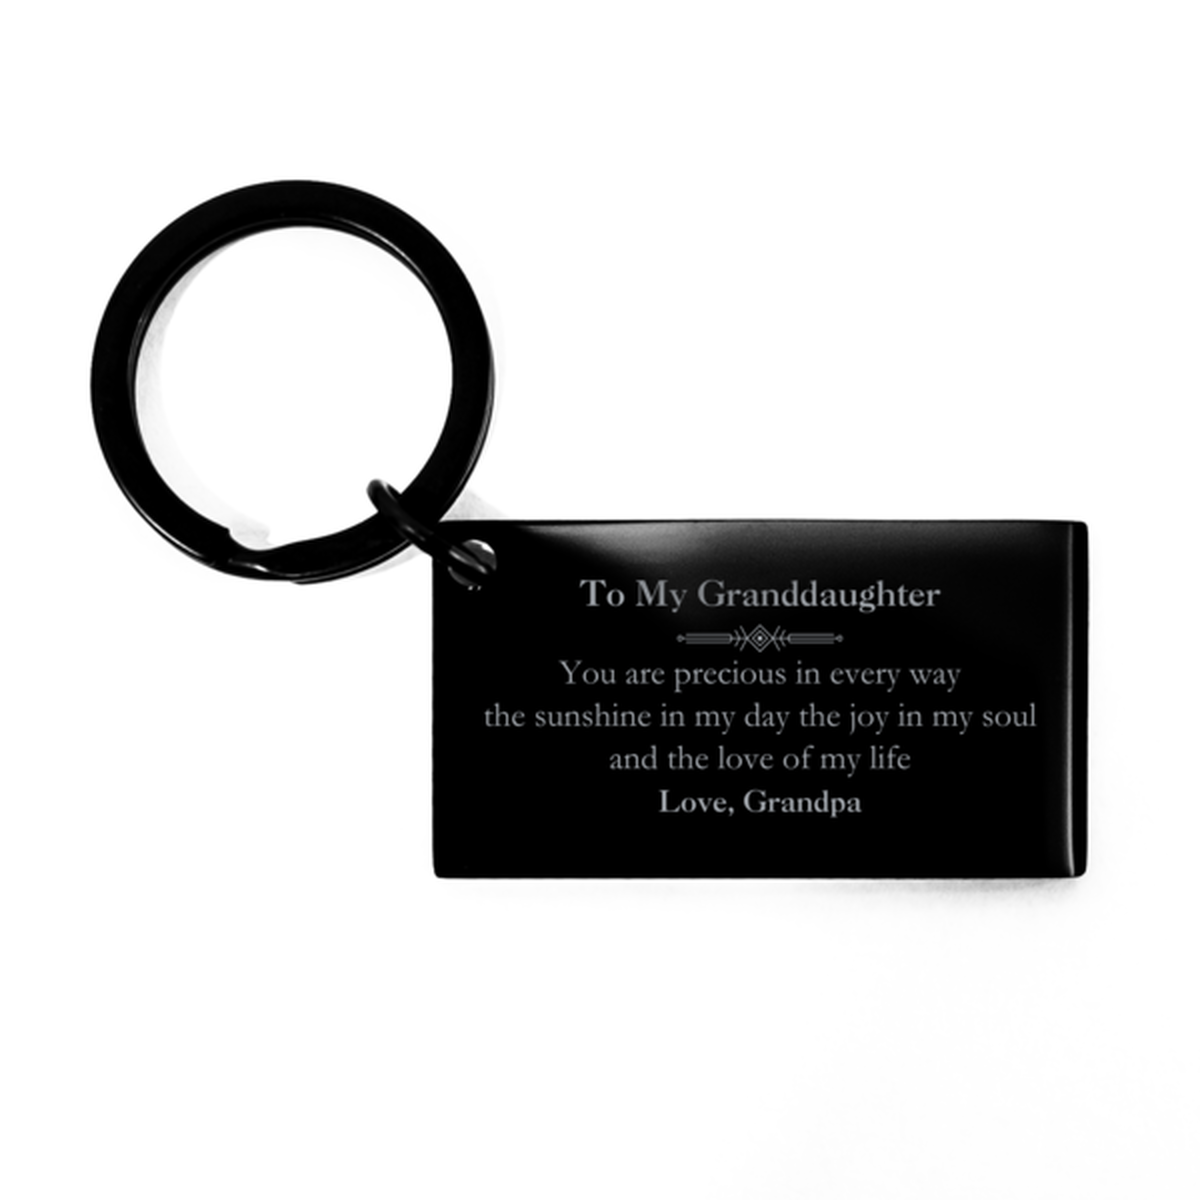 Graduation Gifts for Granddaughter Keychain Present from Grandpa, Christmas Granddaughter Birthday Gifts Granddaughter You are precious in every way the sunshine in my day. Love, Grandpa